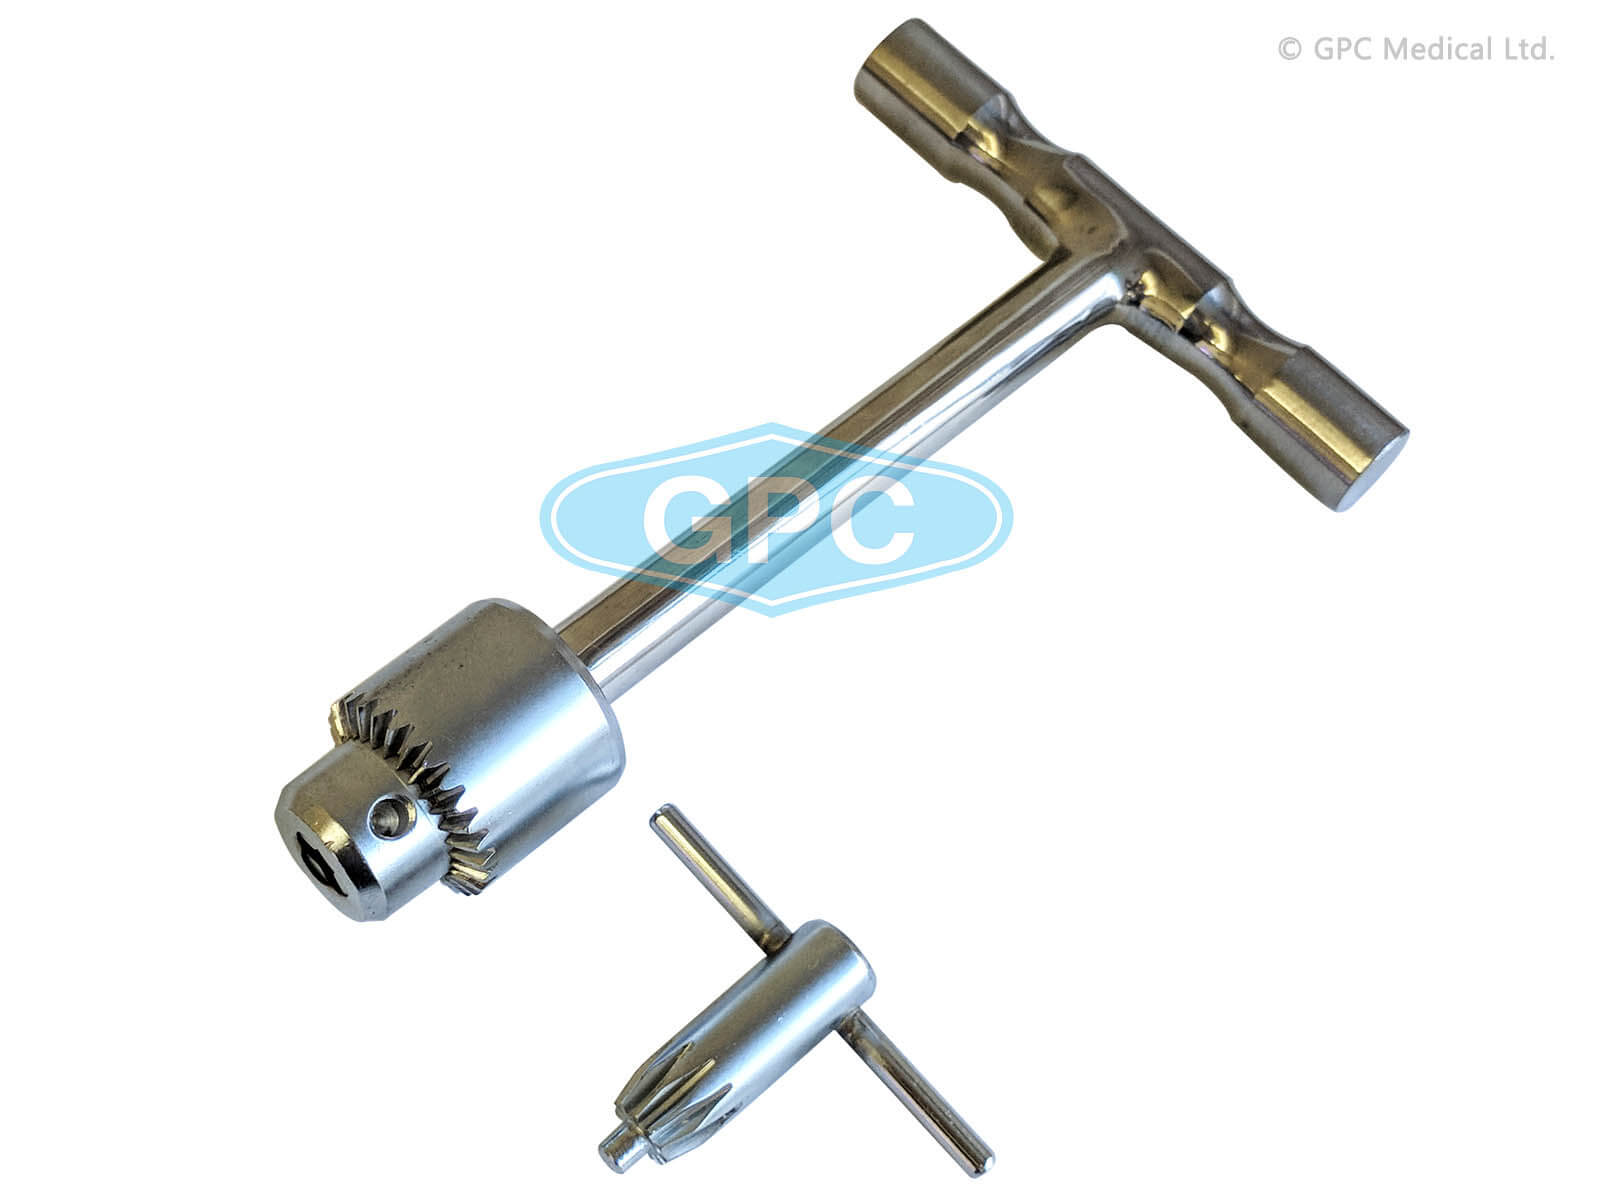 Steinmann pin introducer S.S. with S.S. Chuck & Key